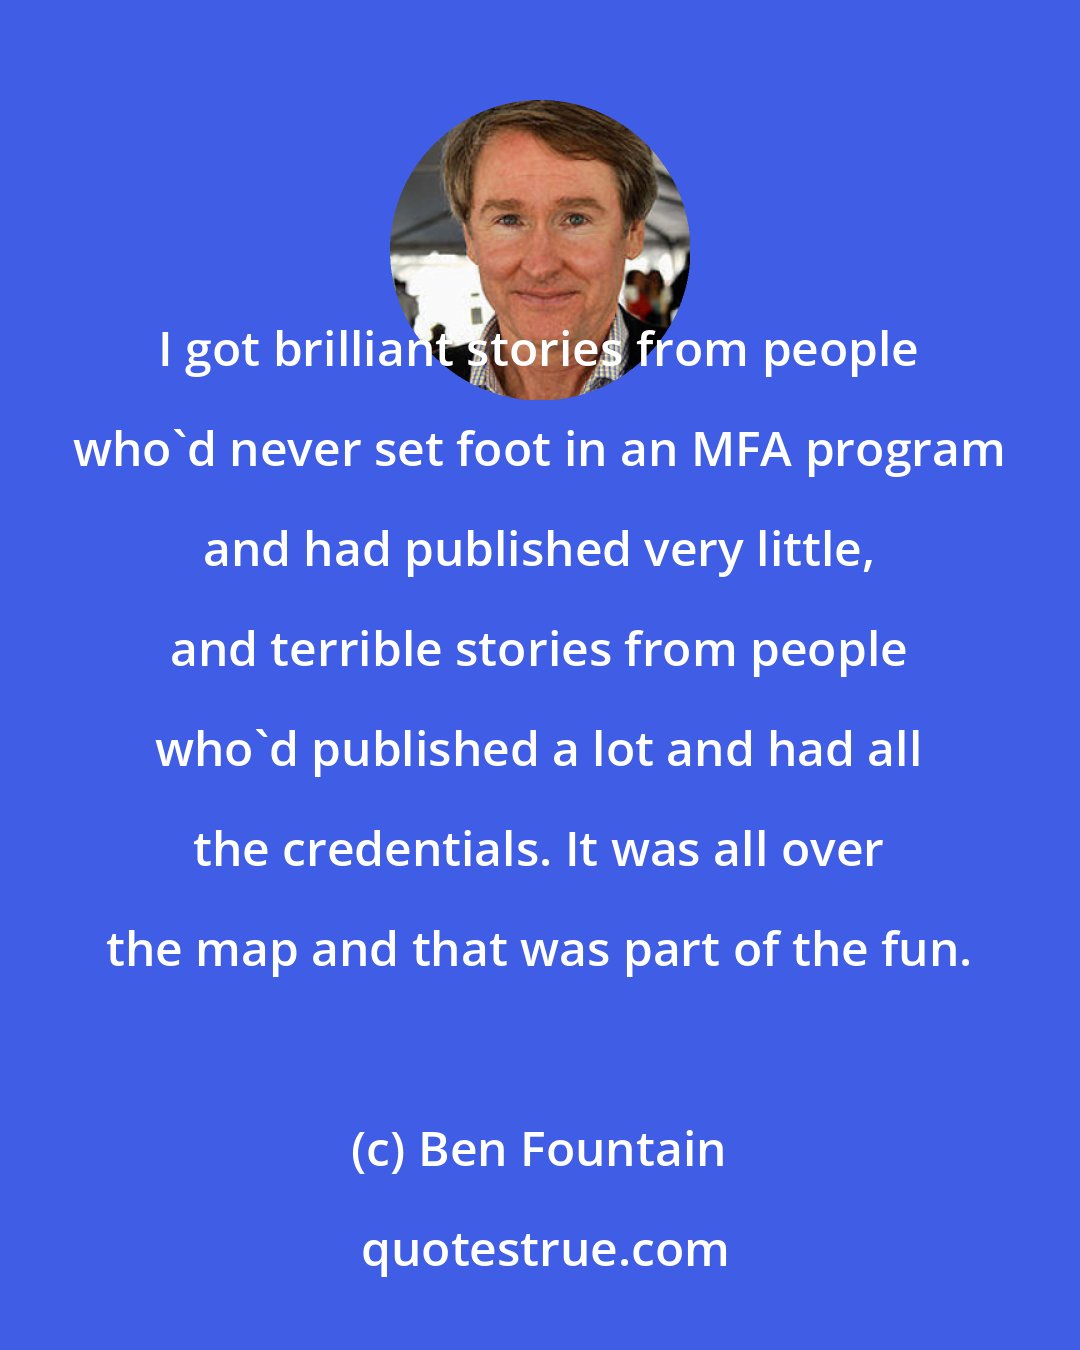 Ben Fountain: I got brilliant stories from people who'd never set foot in an MFA program and had published very little, and terrible stories from people who'd published a lot and had all the credentials. It was all over the map and that was part of the fun.